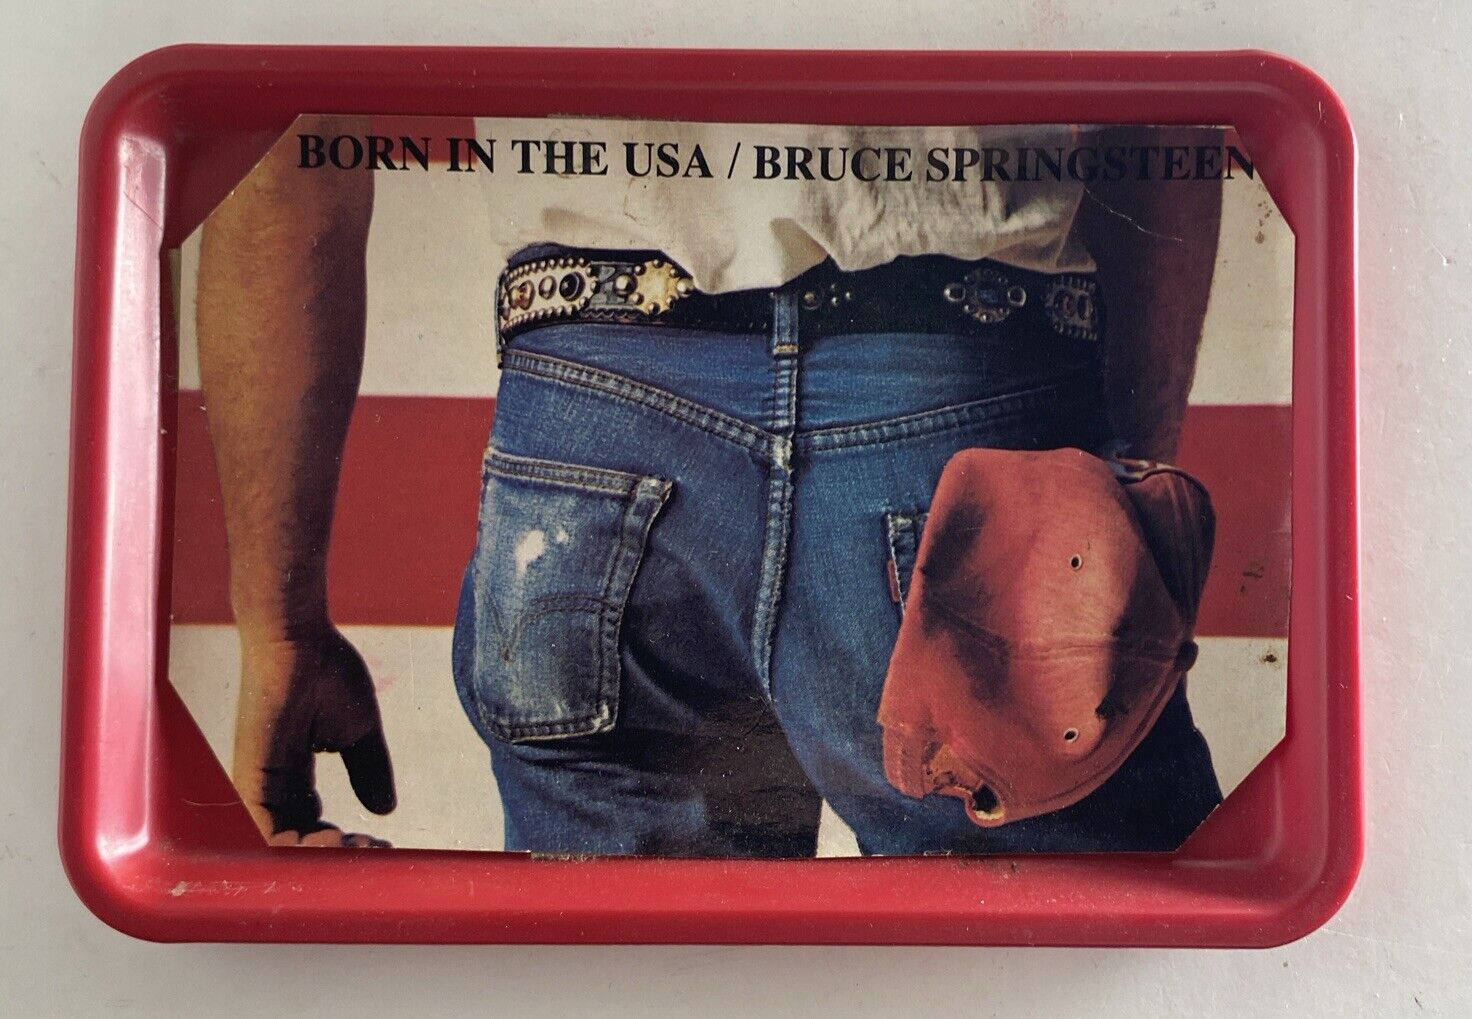 Born In USA Bruce Springsteen Tablecraft Products Trinket Ash Tray 6.5x4.5”